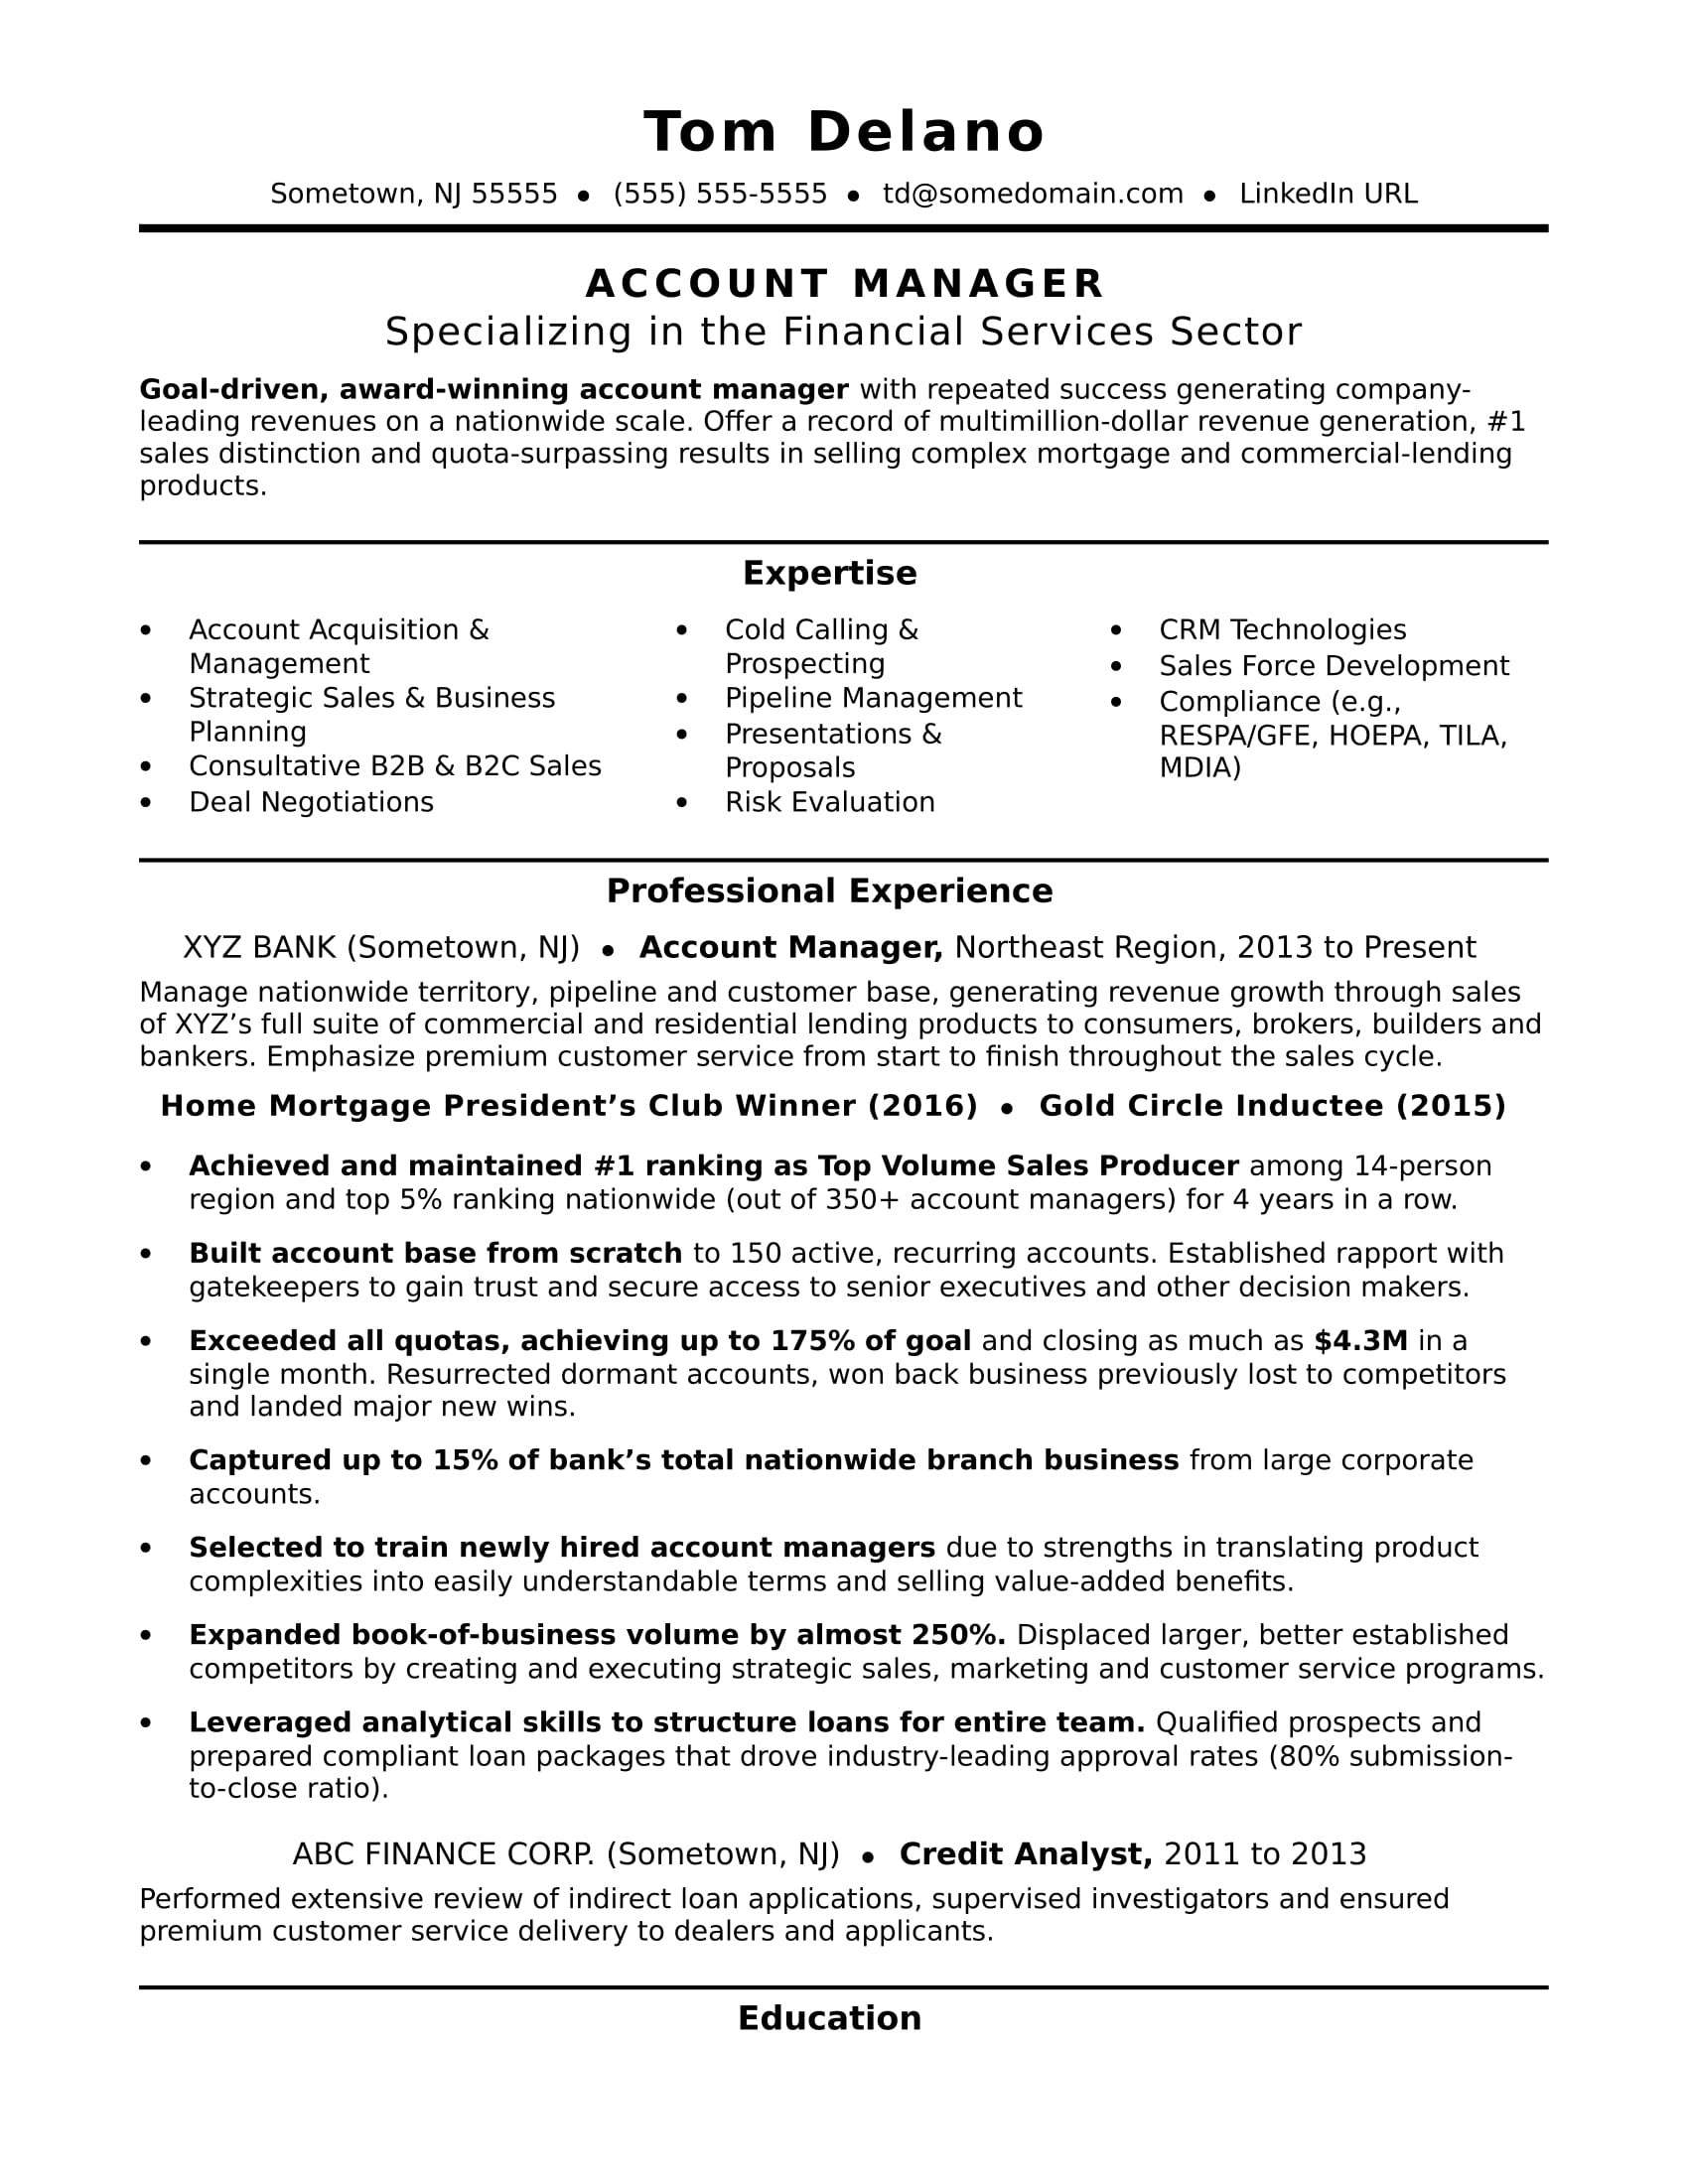 account manager resume sample